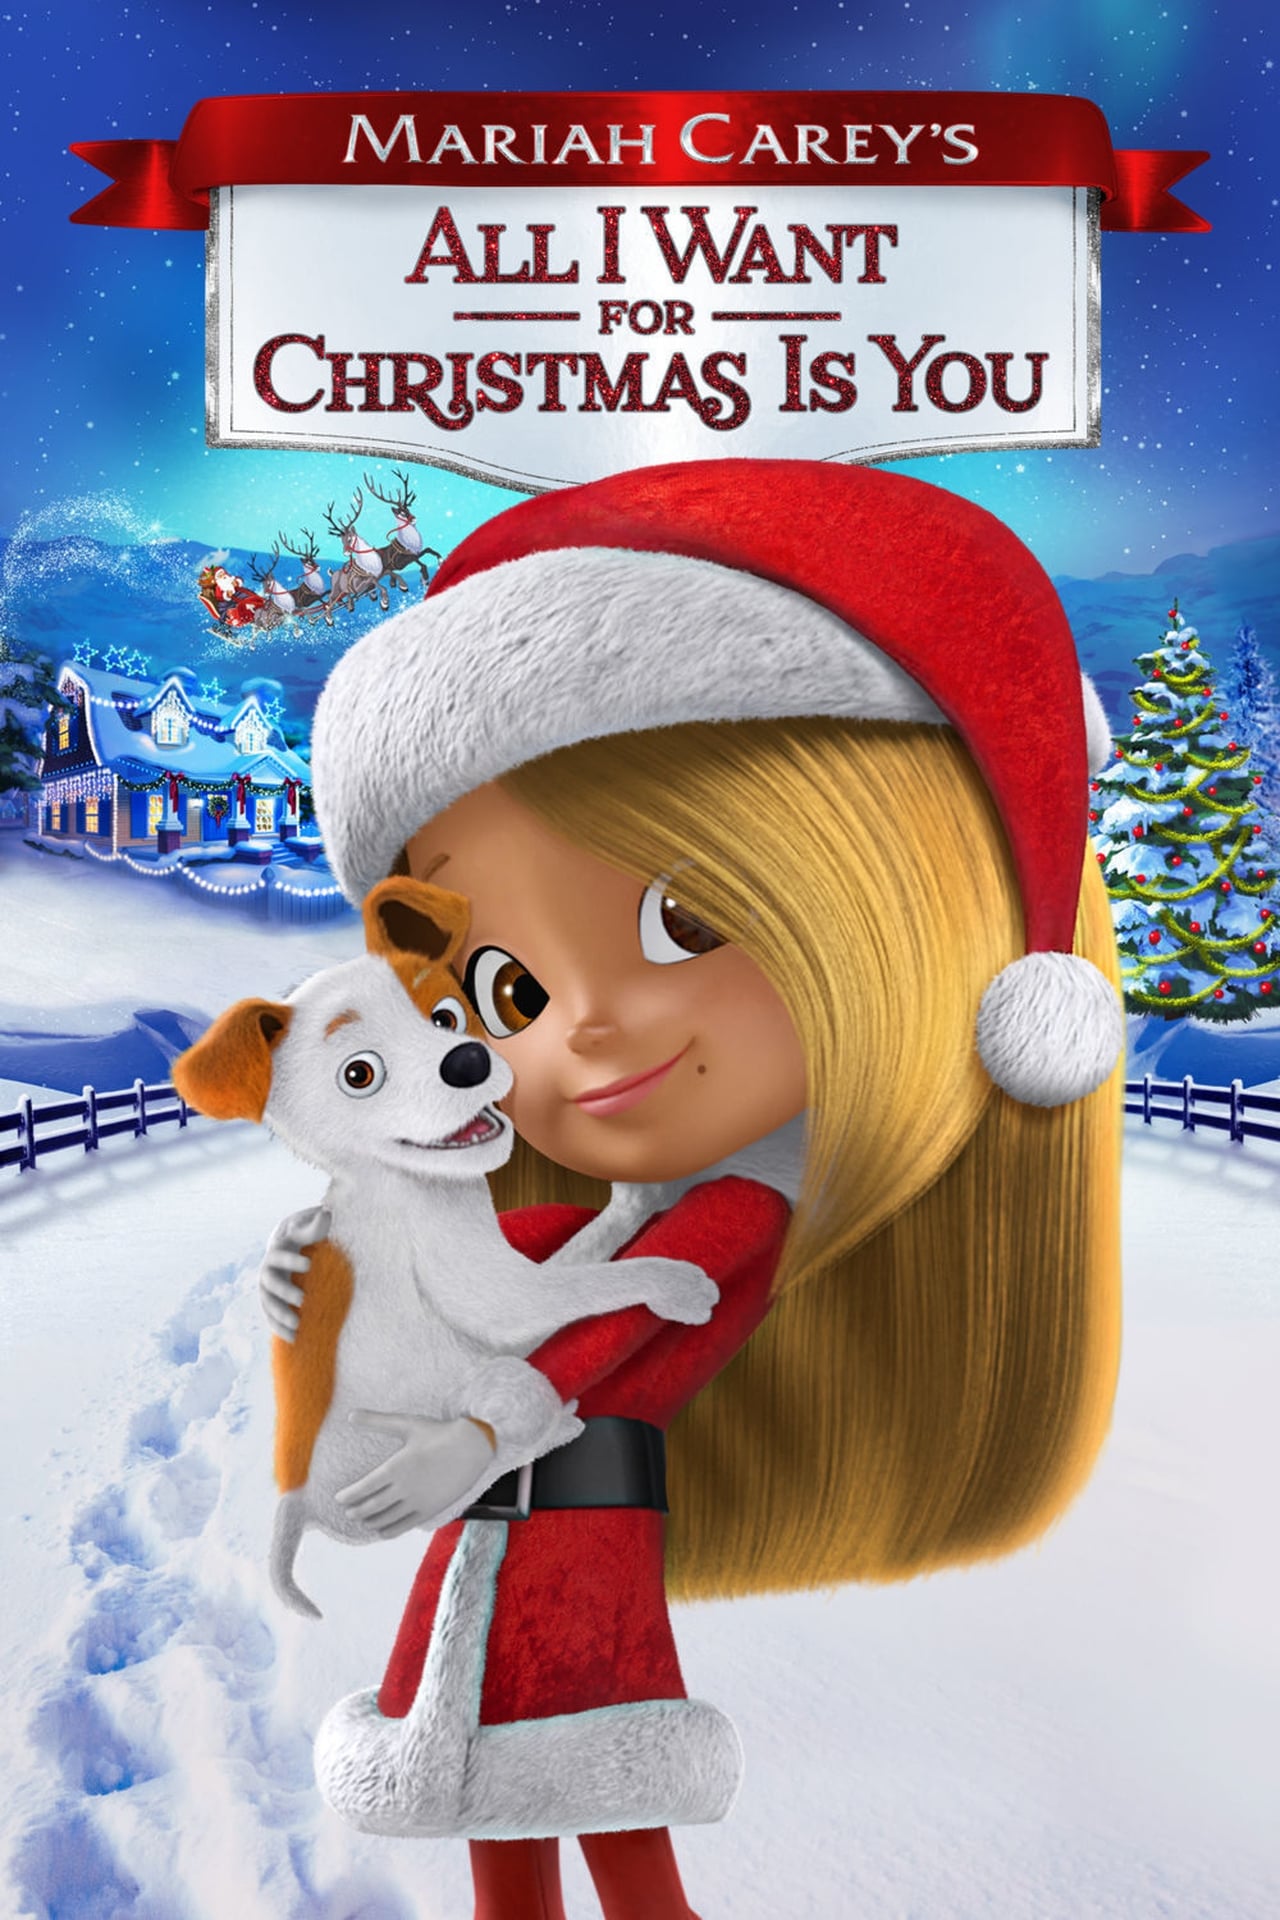 Mariah Carey's All I Want for Christmas Is You wiki, synopsis, reviews, watch and download